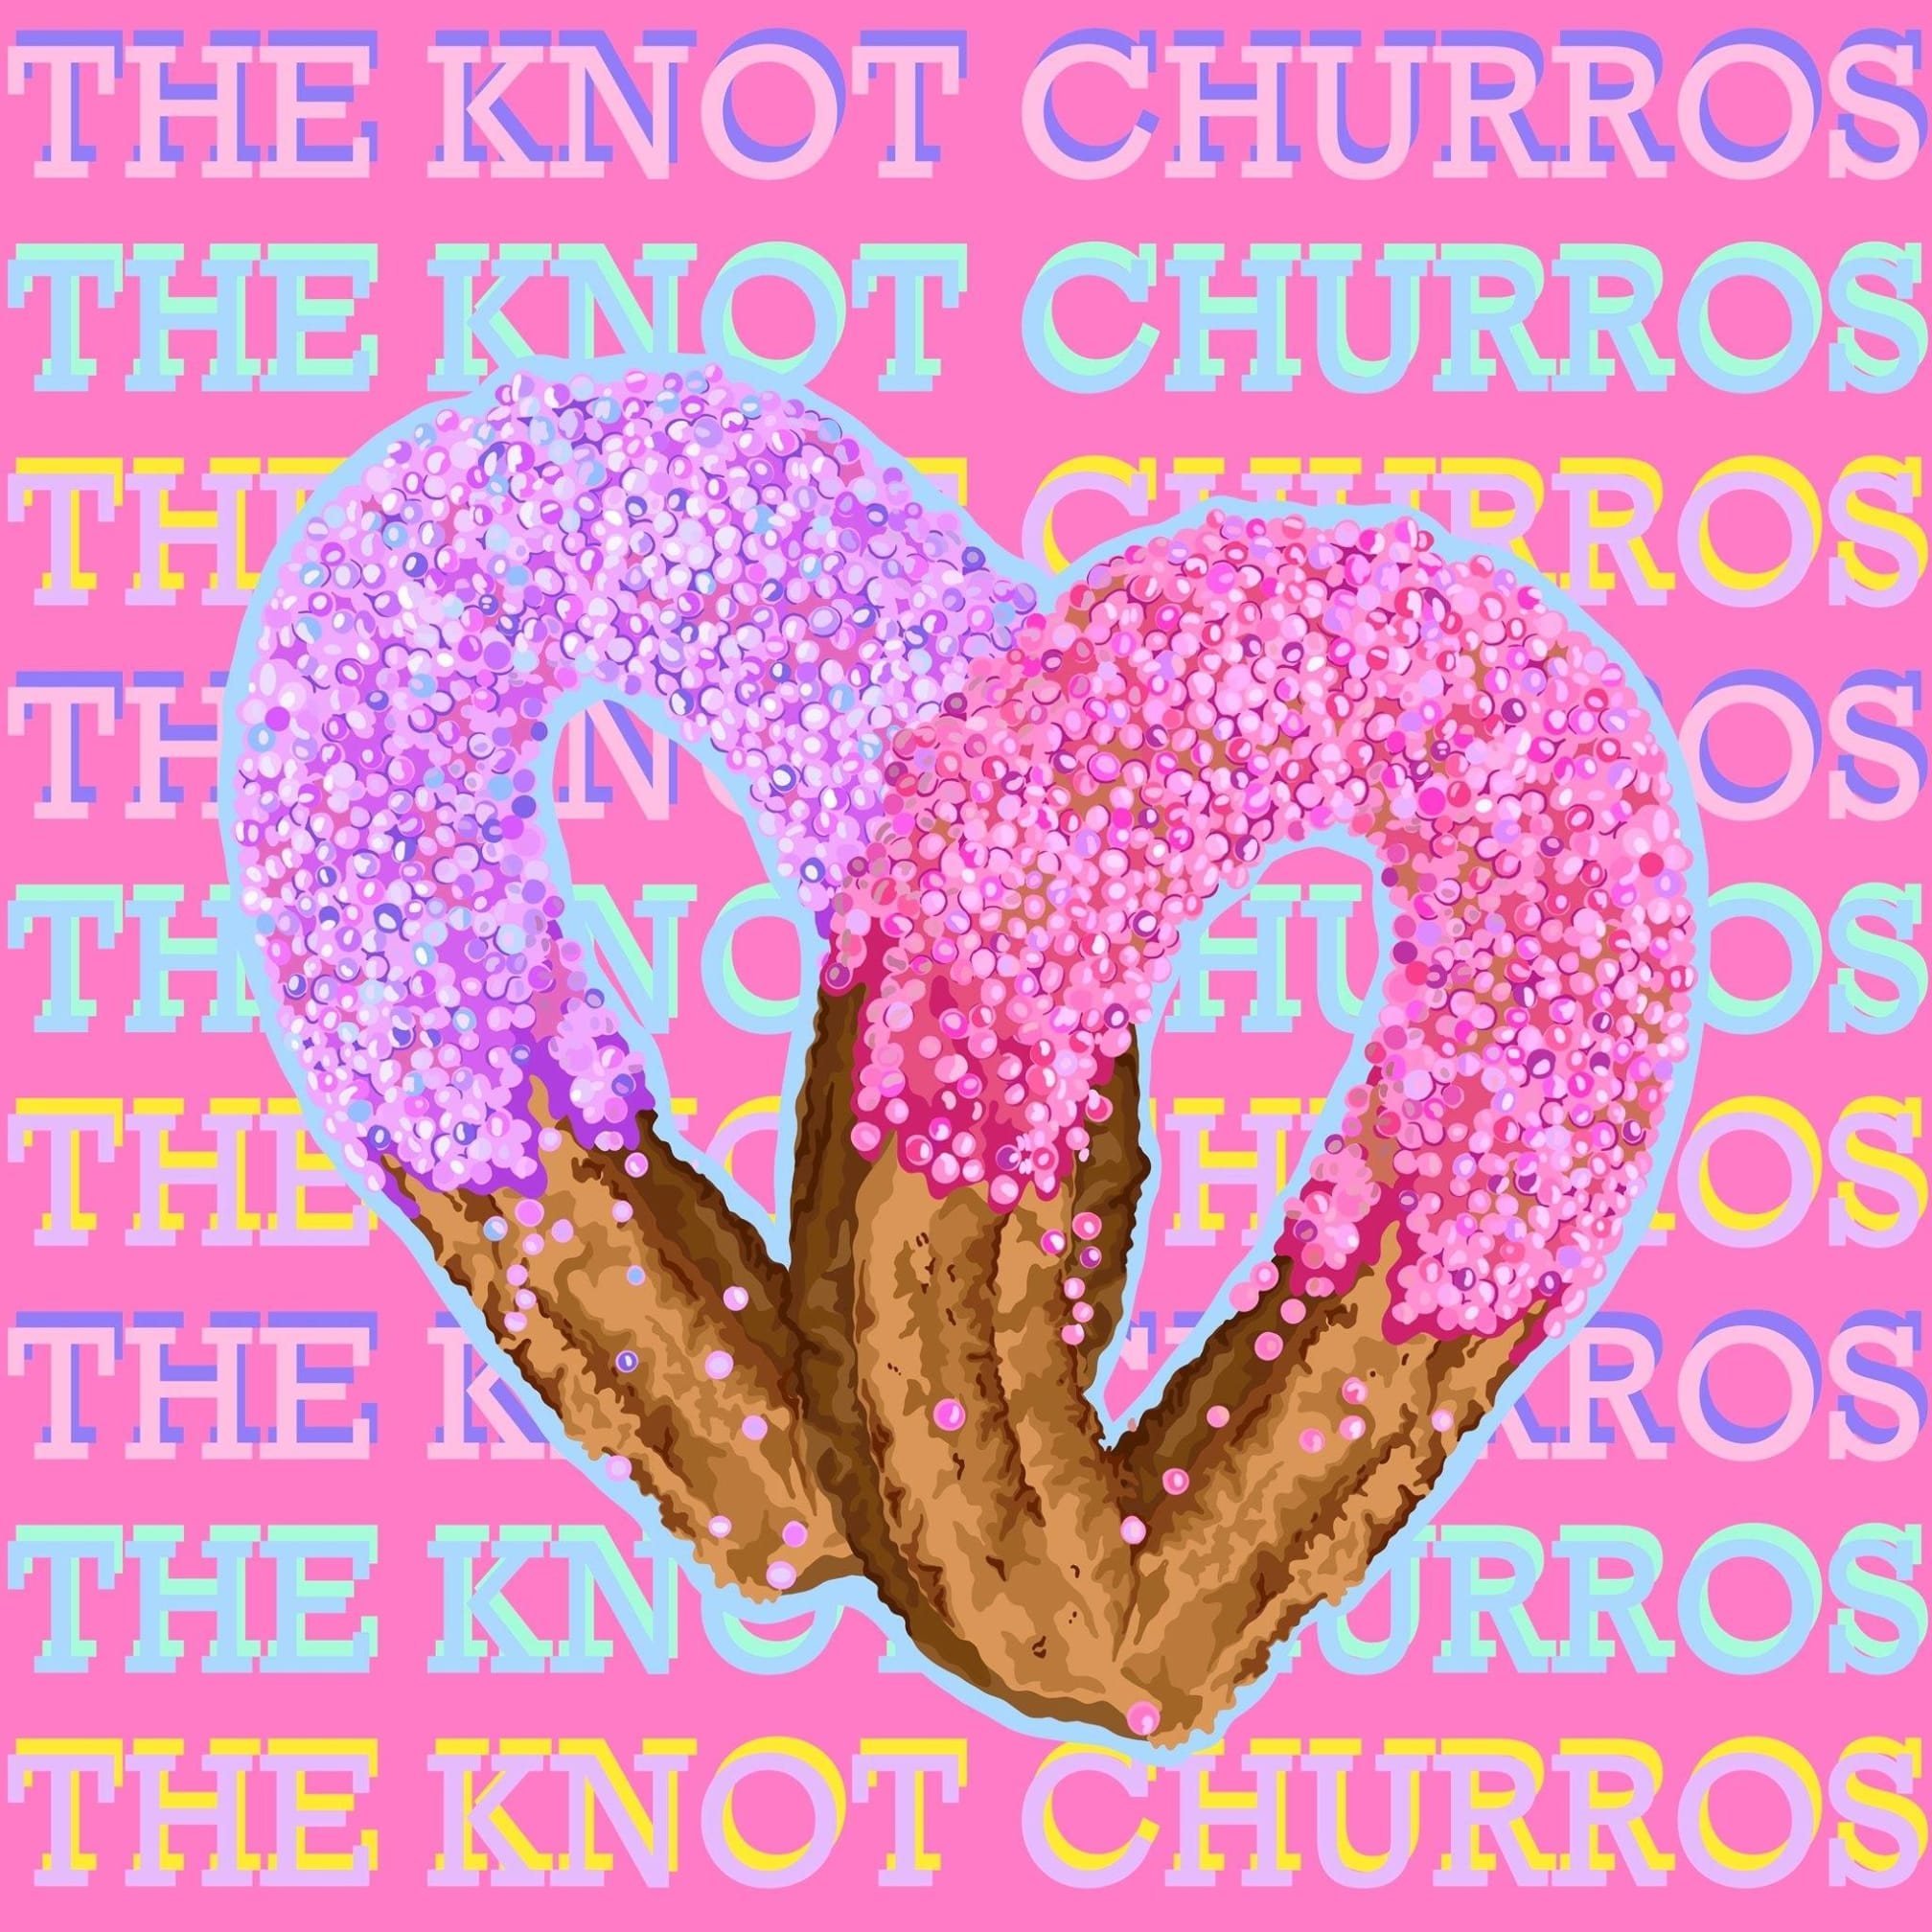 Images The Knot Churros